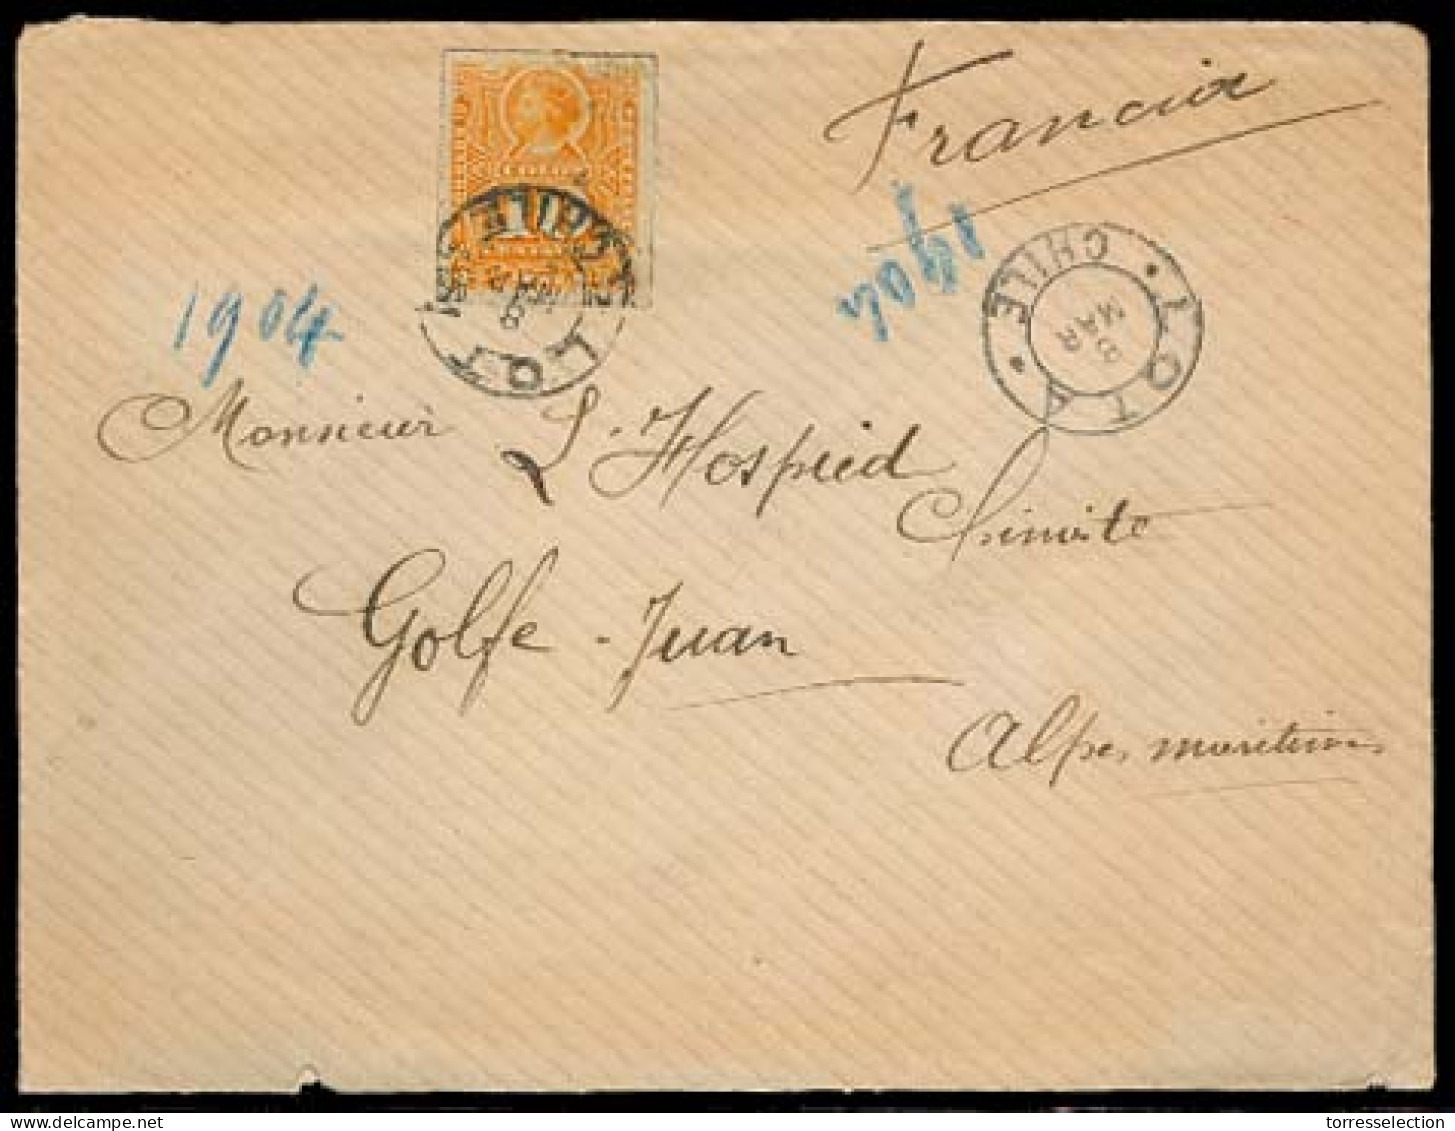 CHILE. 1904. Lota - France / Le Golfe Juan. Fkd Env 10c Yellow - Orange / Cds. VF. Carried By SS Atlantique / French Mar - Chile